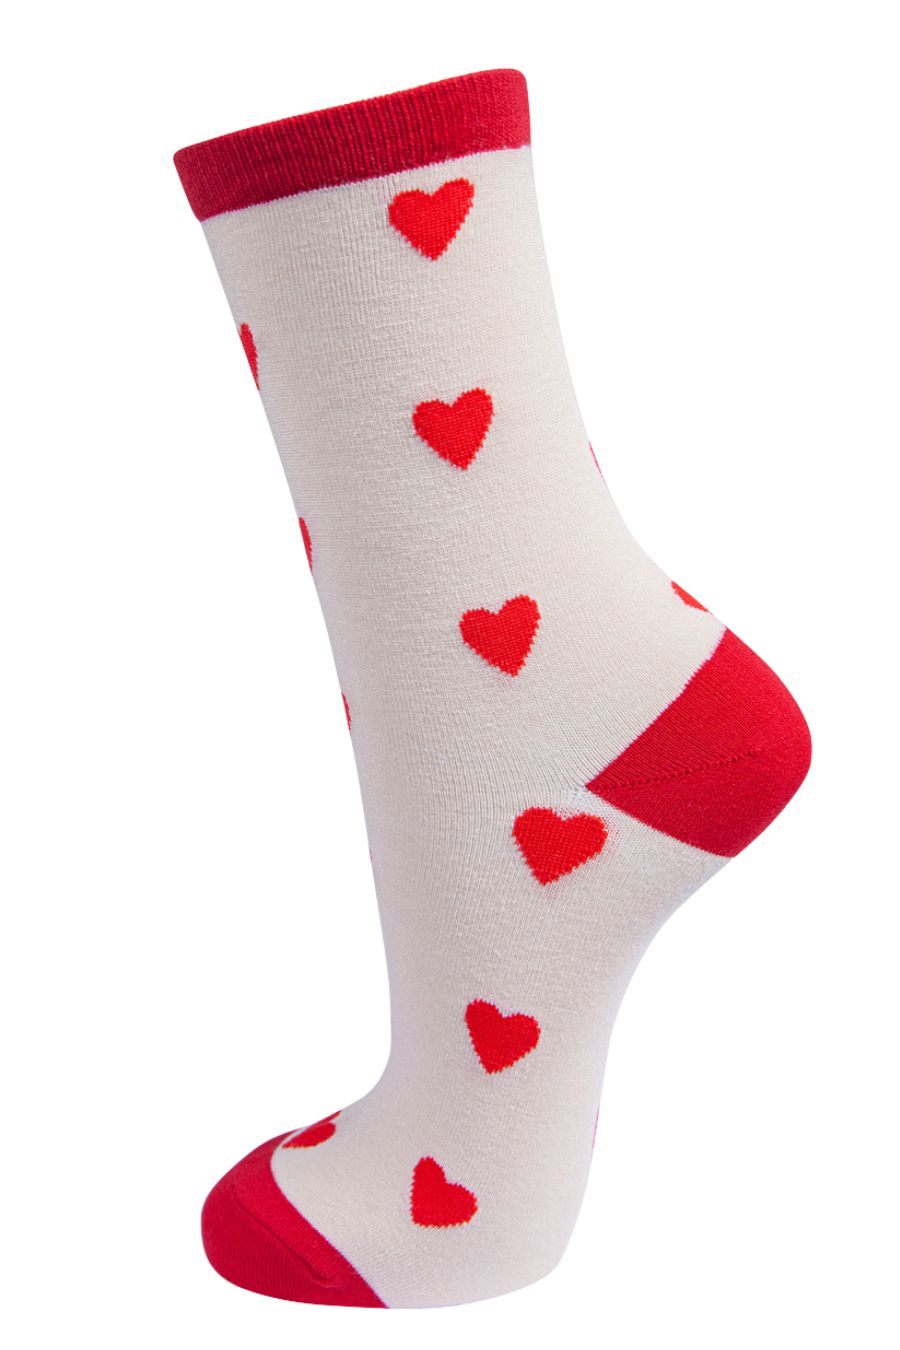 cream and red bamboo socks with an all over pattern of red love hearts